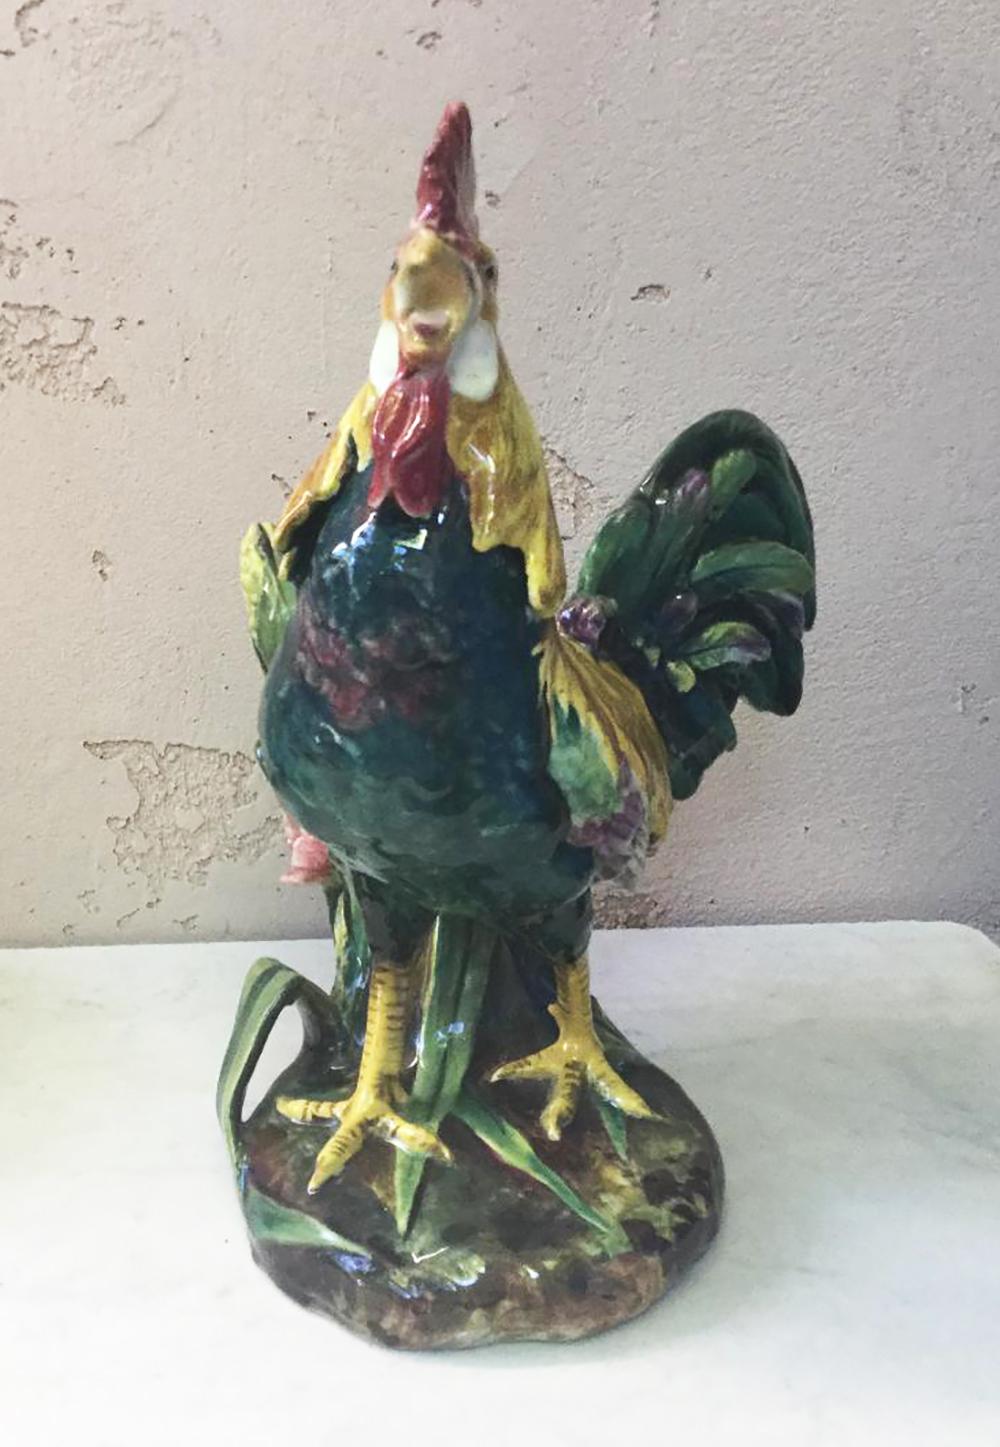 Antique Majolica rooster with leaves, corn and wild rose vase signed Delphin Massier, circa 1890.
The Massier produced roosters in a big range of sizes, this is the medium size. The roosters are the symbol of France and they were very popular on